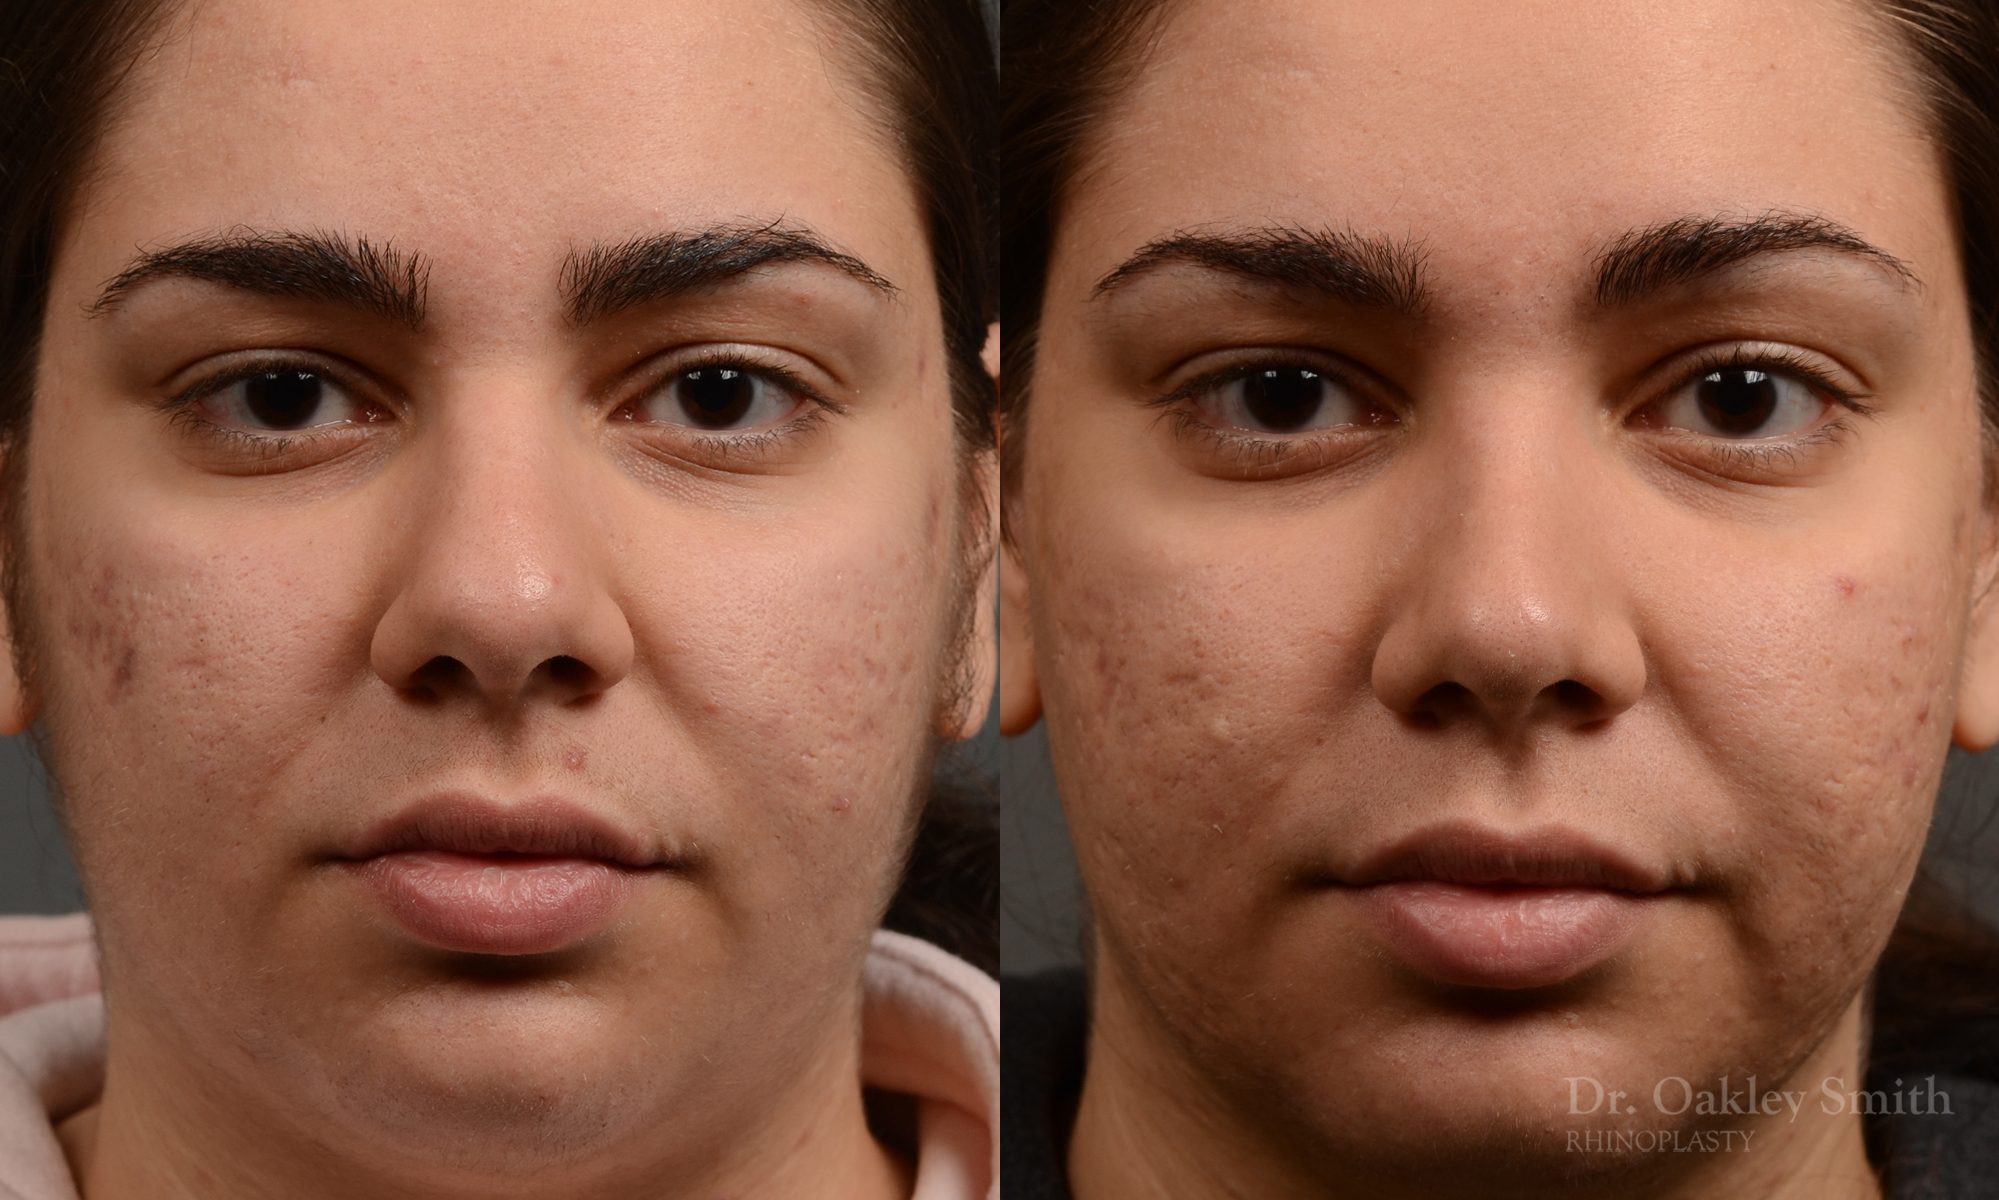 396 - Expert Rhinoplasty nose job surgery to reduce the size of this womans nose.